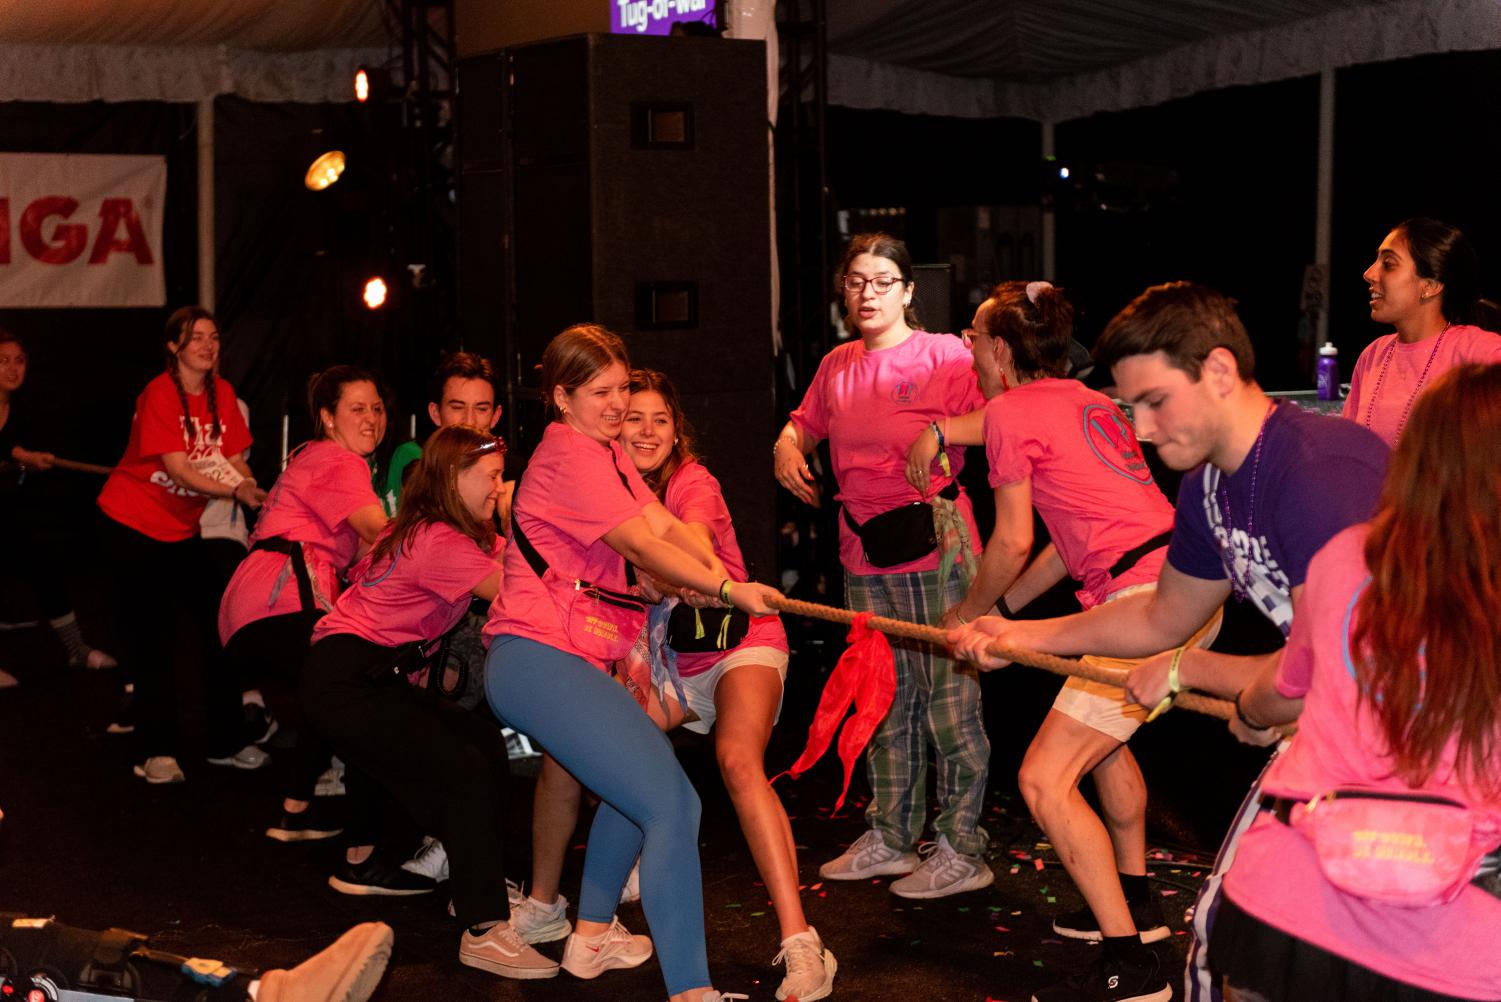 A group of people in pink shirts pull a rope in a game of tug of war. 